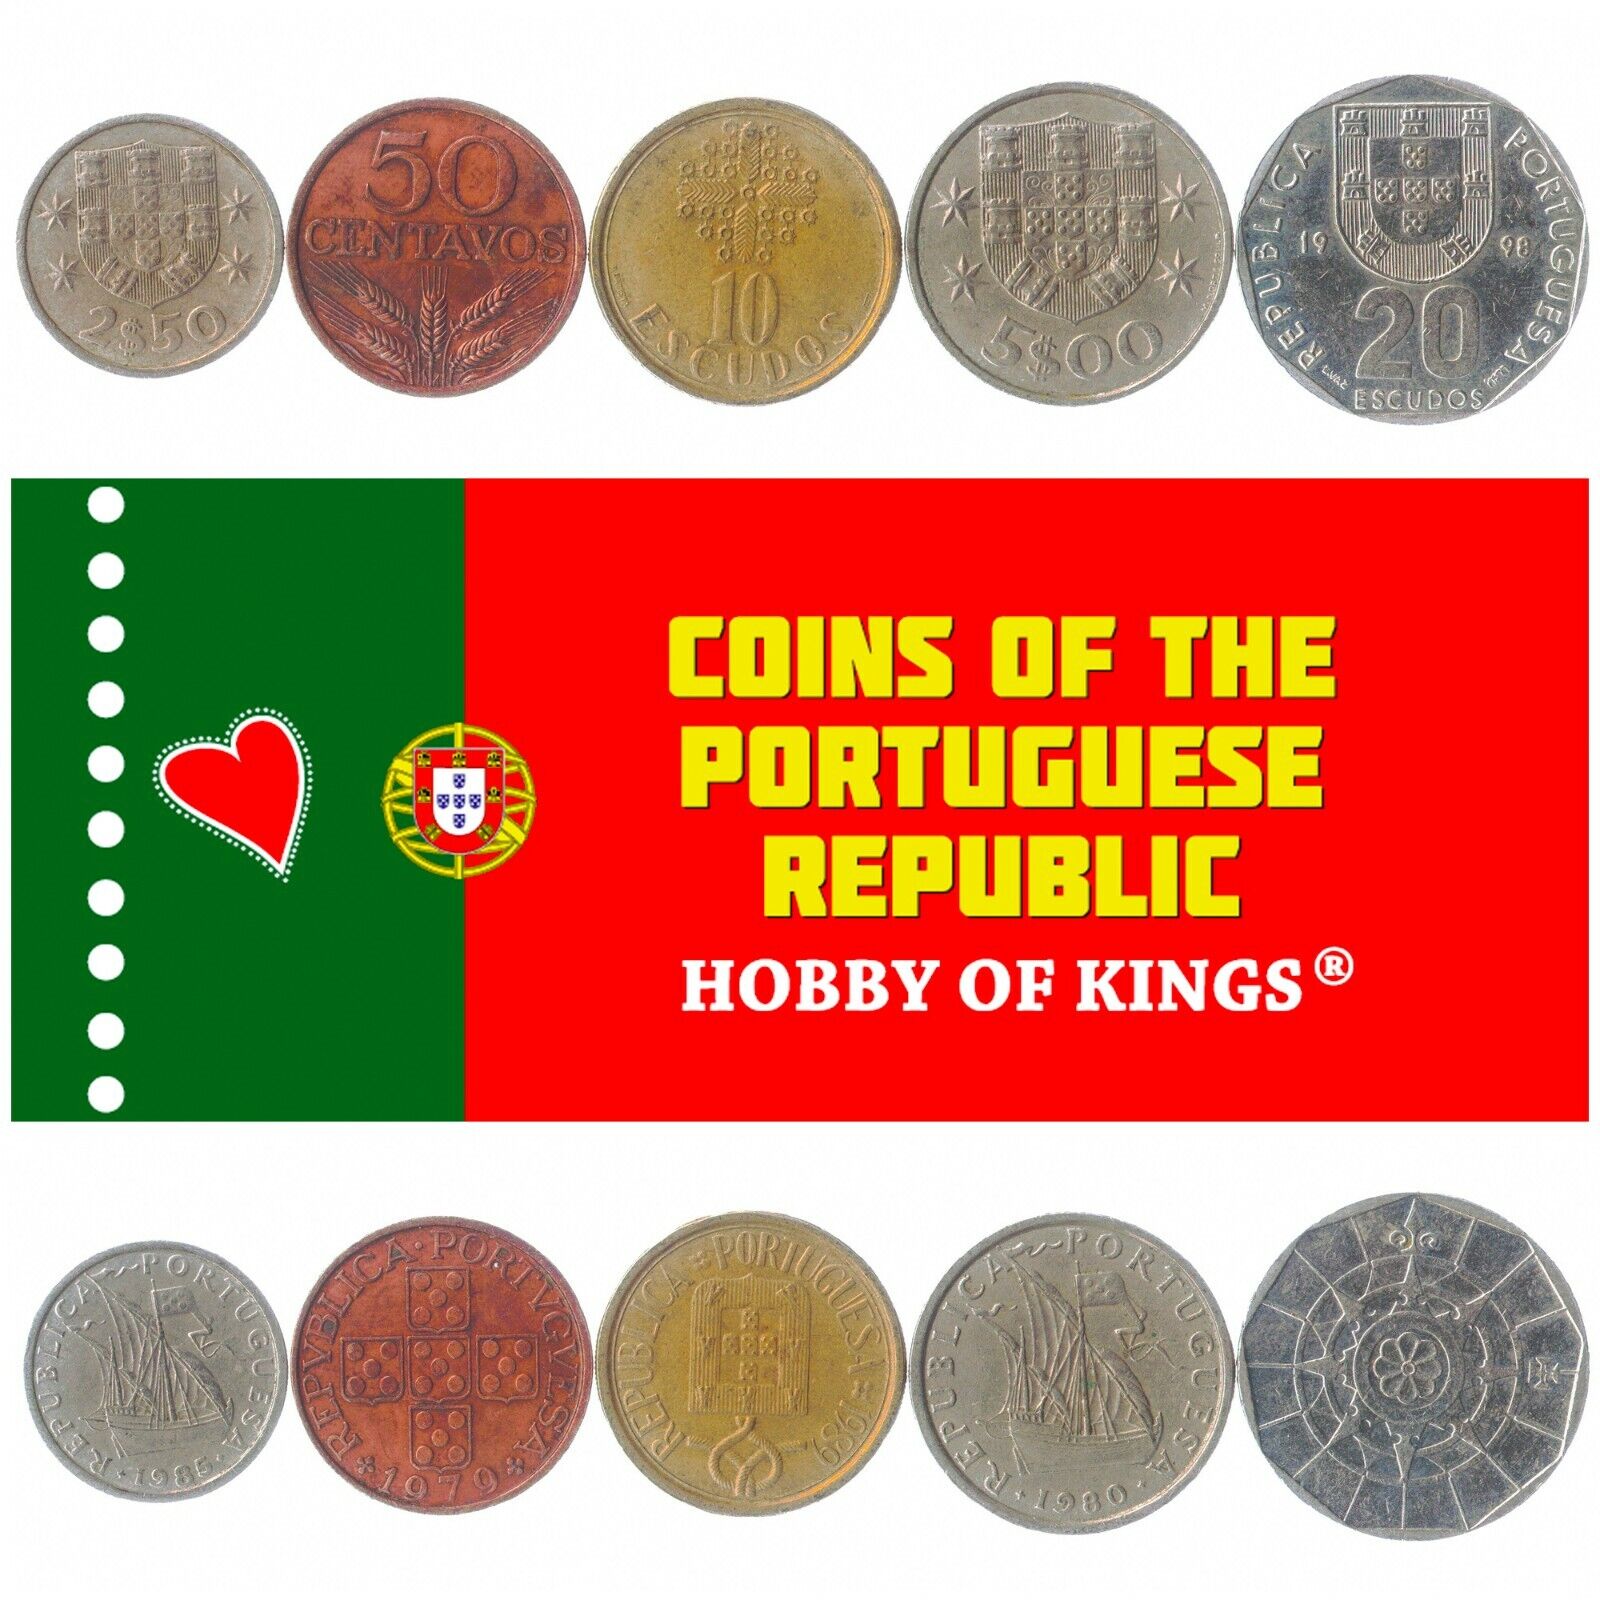 5 PORTUGUESE COINS. DIFFERENT COINS. EUROPEAN FOREIGN CURRENCY, VALUABLE MONEY Без бренда - фотография #2